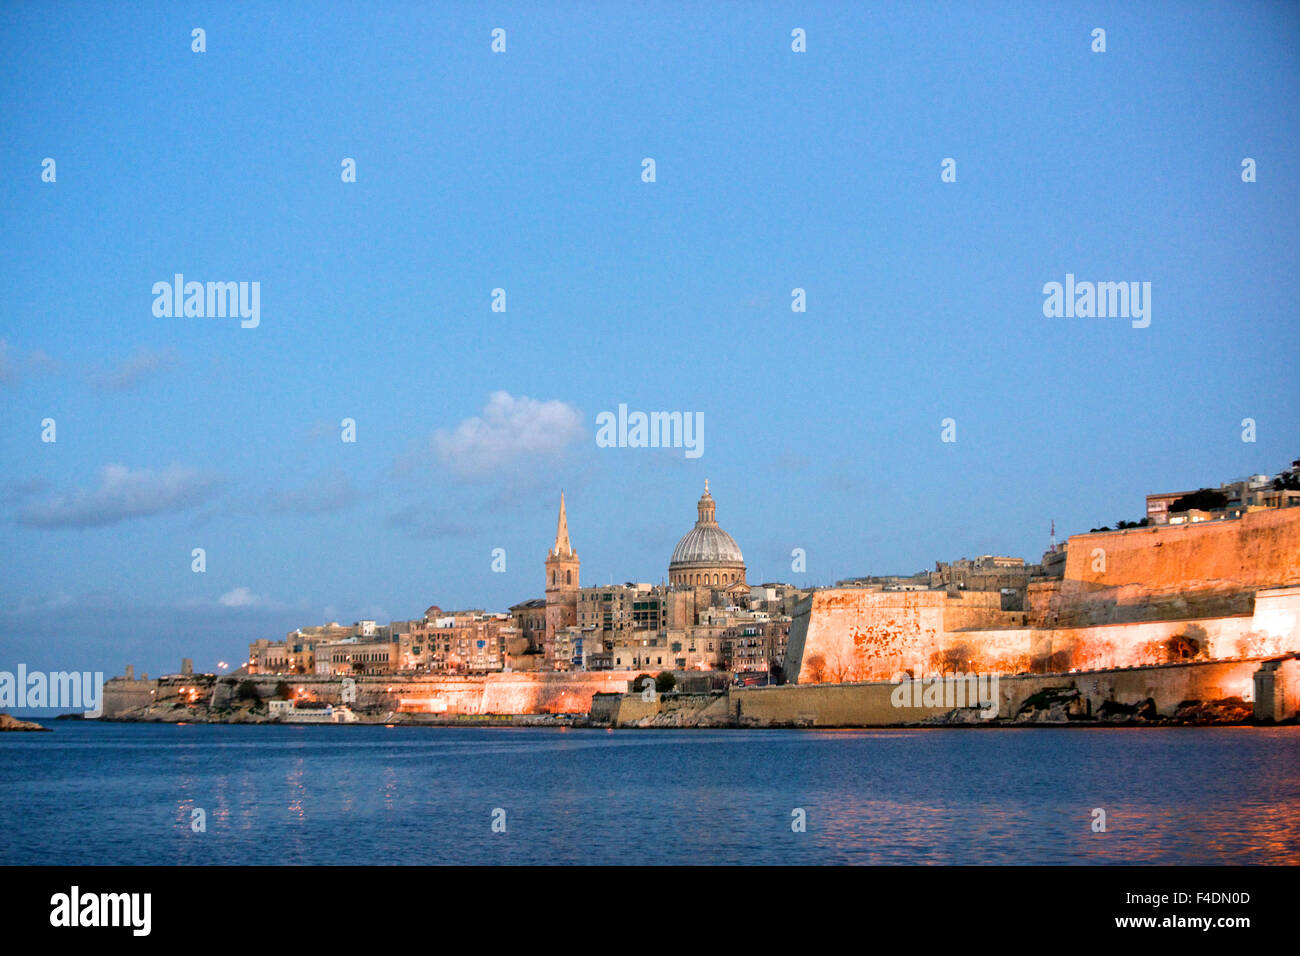 Valletta, Malta, skyline with the dome of the Carmelite Sisters church, St. Paul's Anglican Cathedral spire, and St. Andrew's Bastion (Large format sizes available). Stock Photo